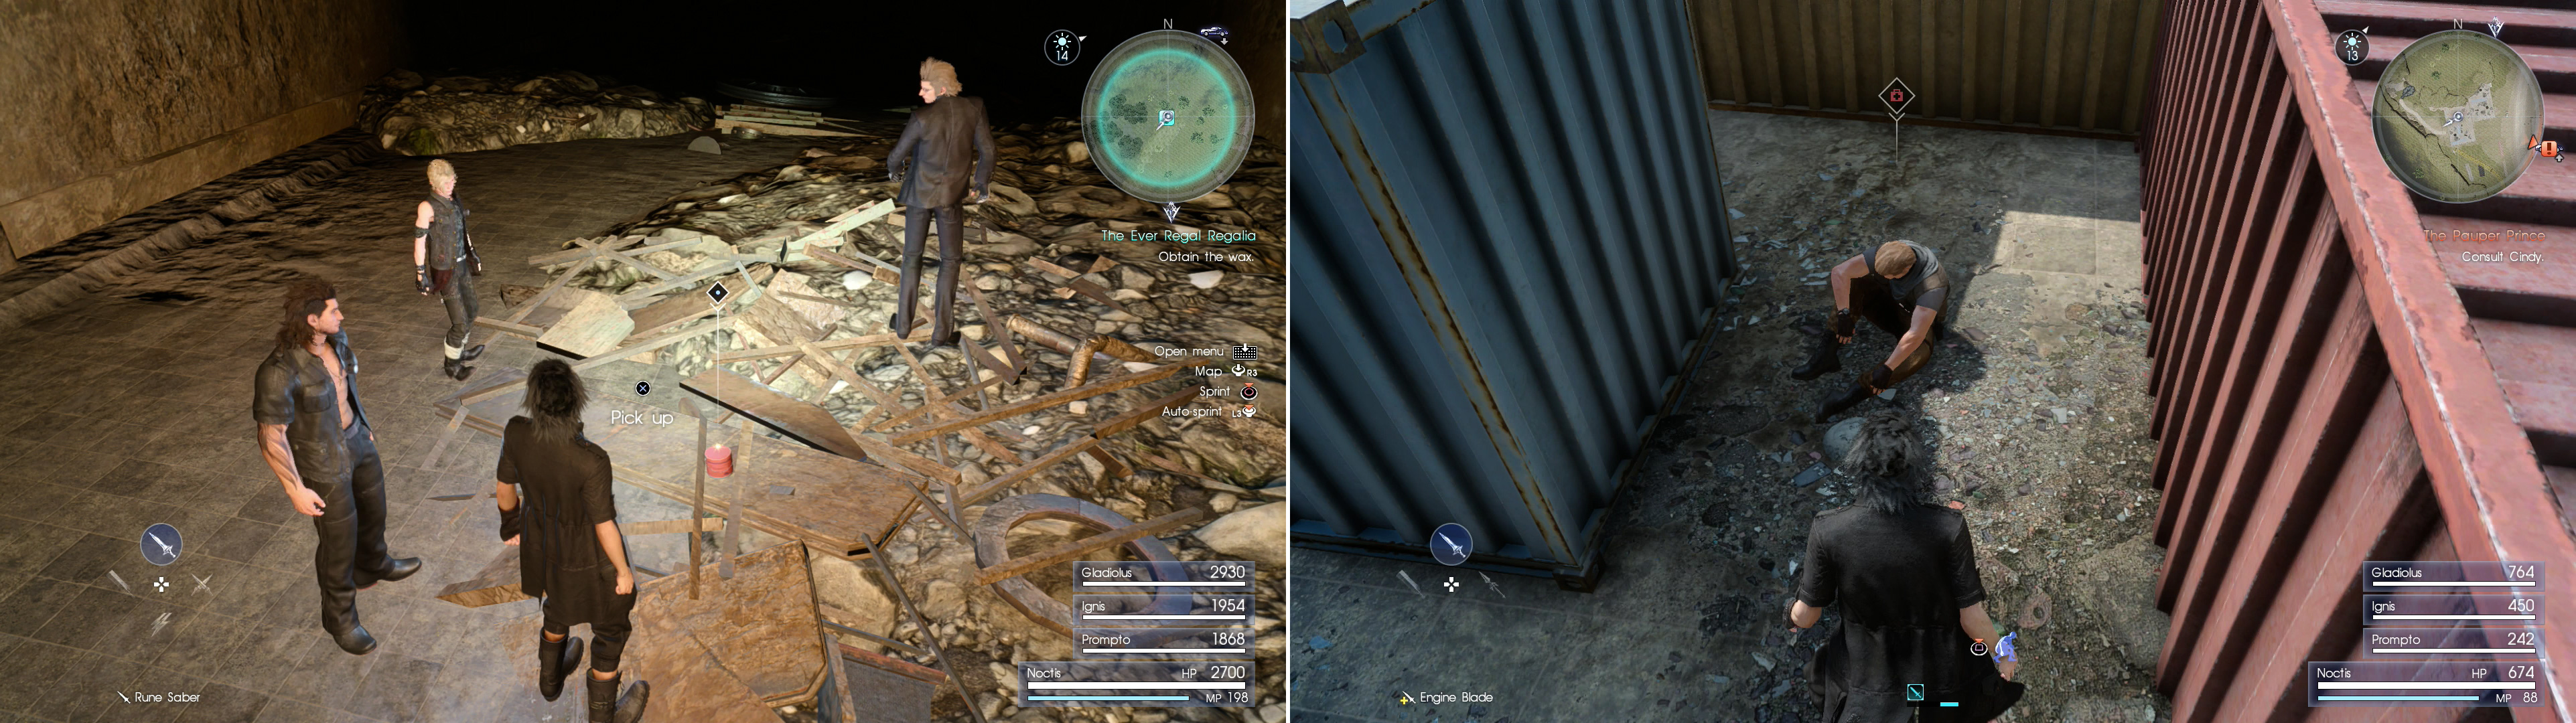 Defeat any pesky Goblins in your way and claim the rare Aero Wax (left). Outside of the mine you’ll find a wounded hunter licking his wounds amongst some shipping crates (right).